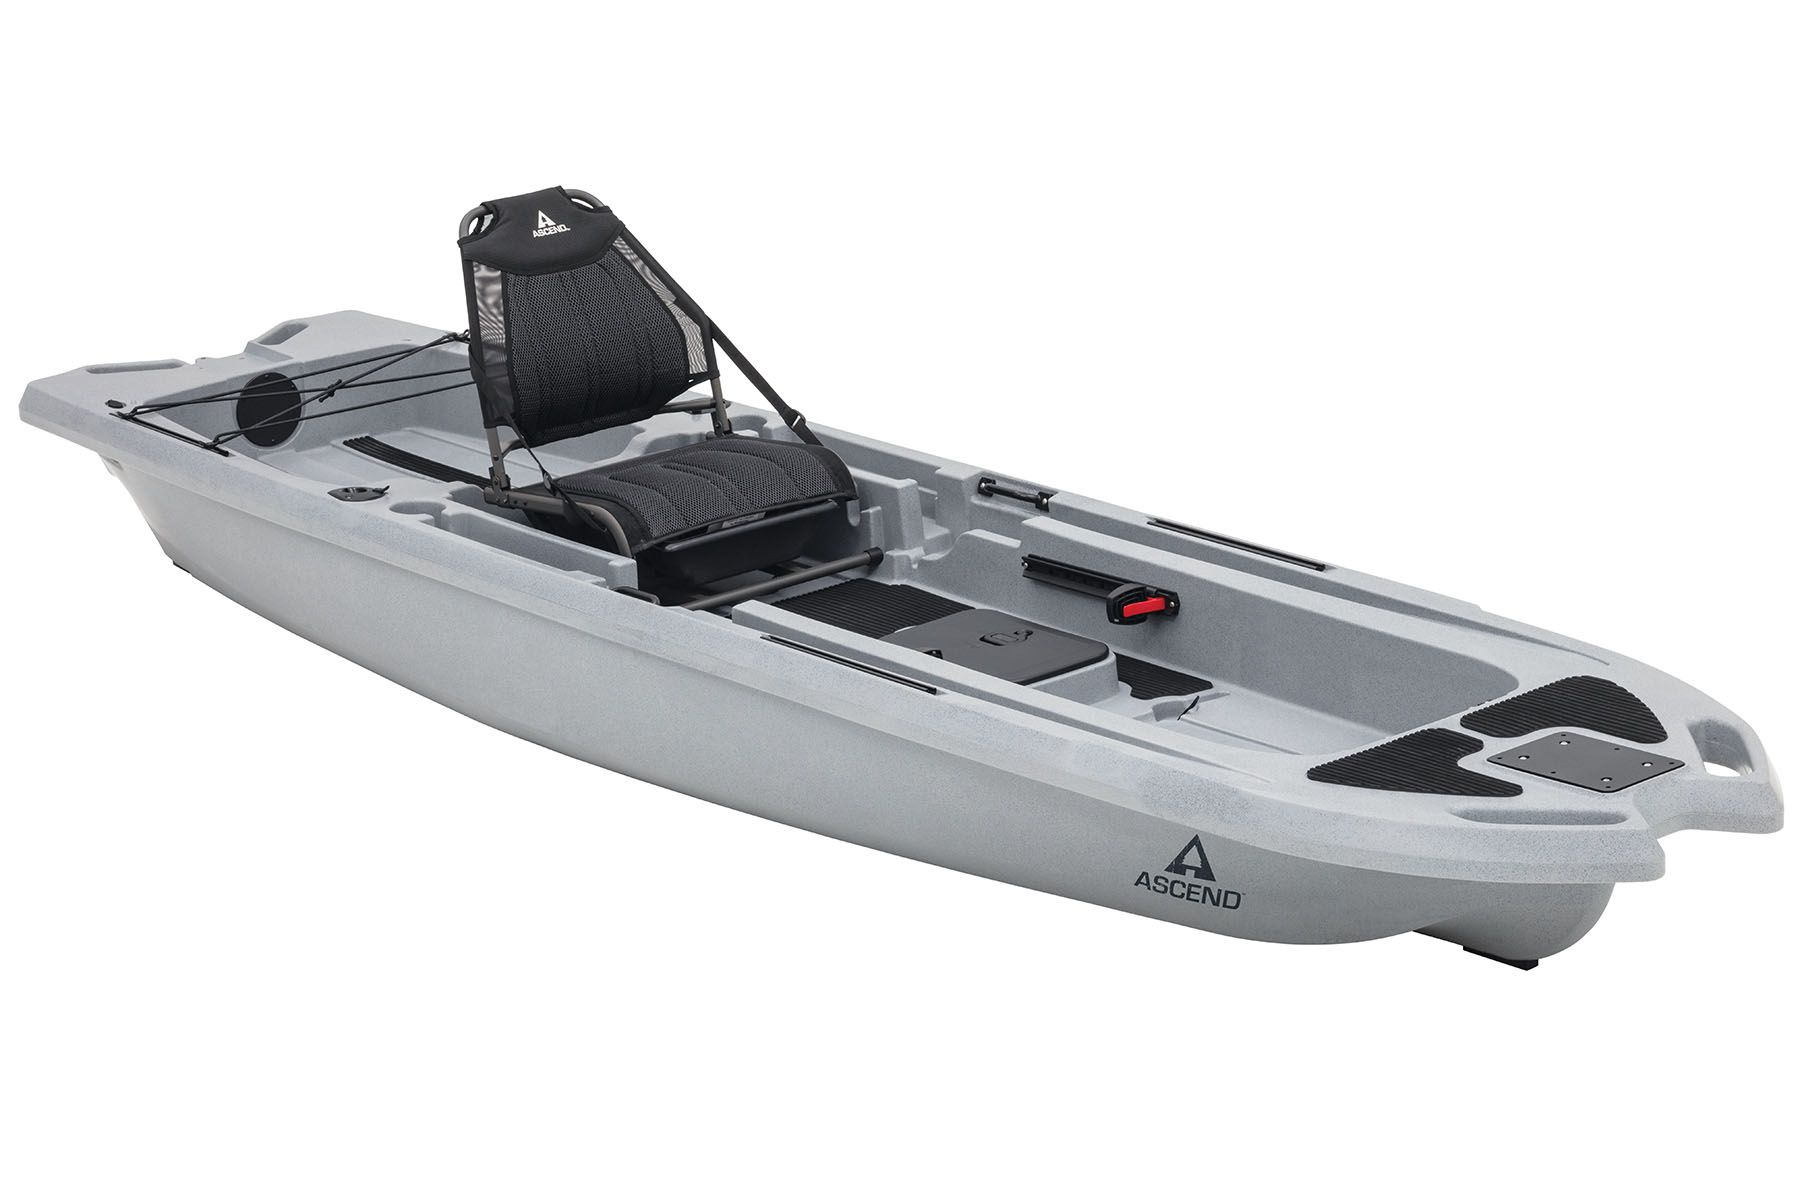 About Ascend Kayaks